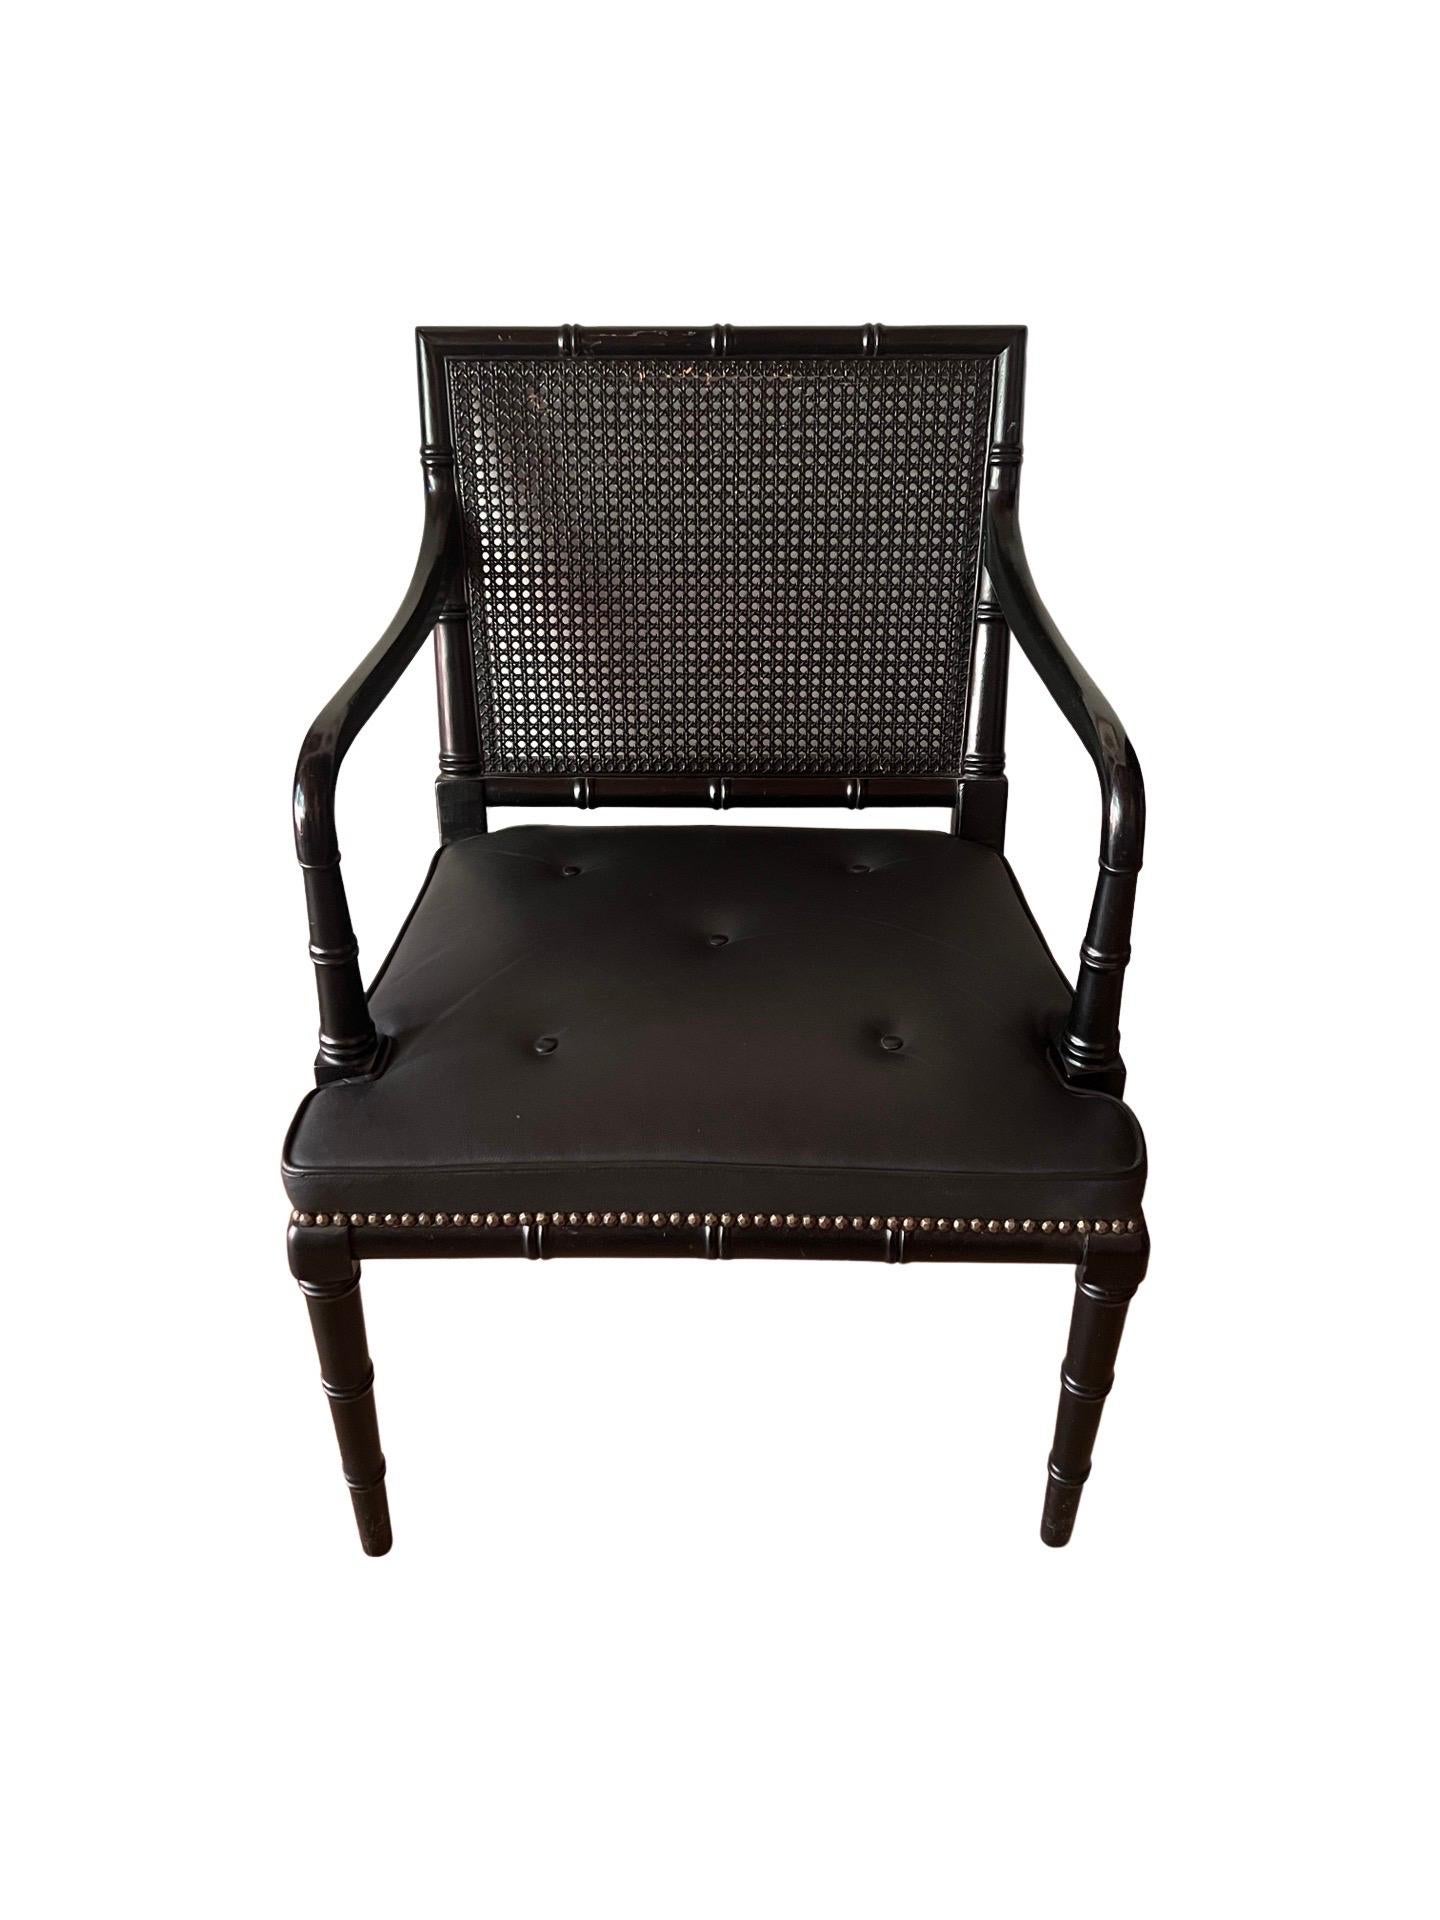 English, 20th century. 
A vintage pair of English bench made armchairs. Each with a faux bamboo Regency style frame which is done with an ebony finish. The seats have recessed button accents and have a cane back. Unmarked. 